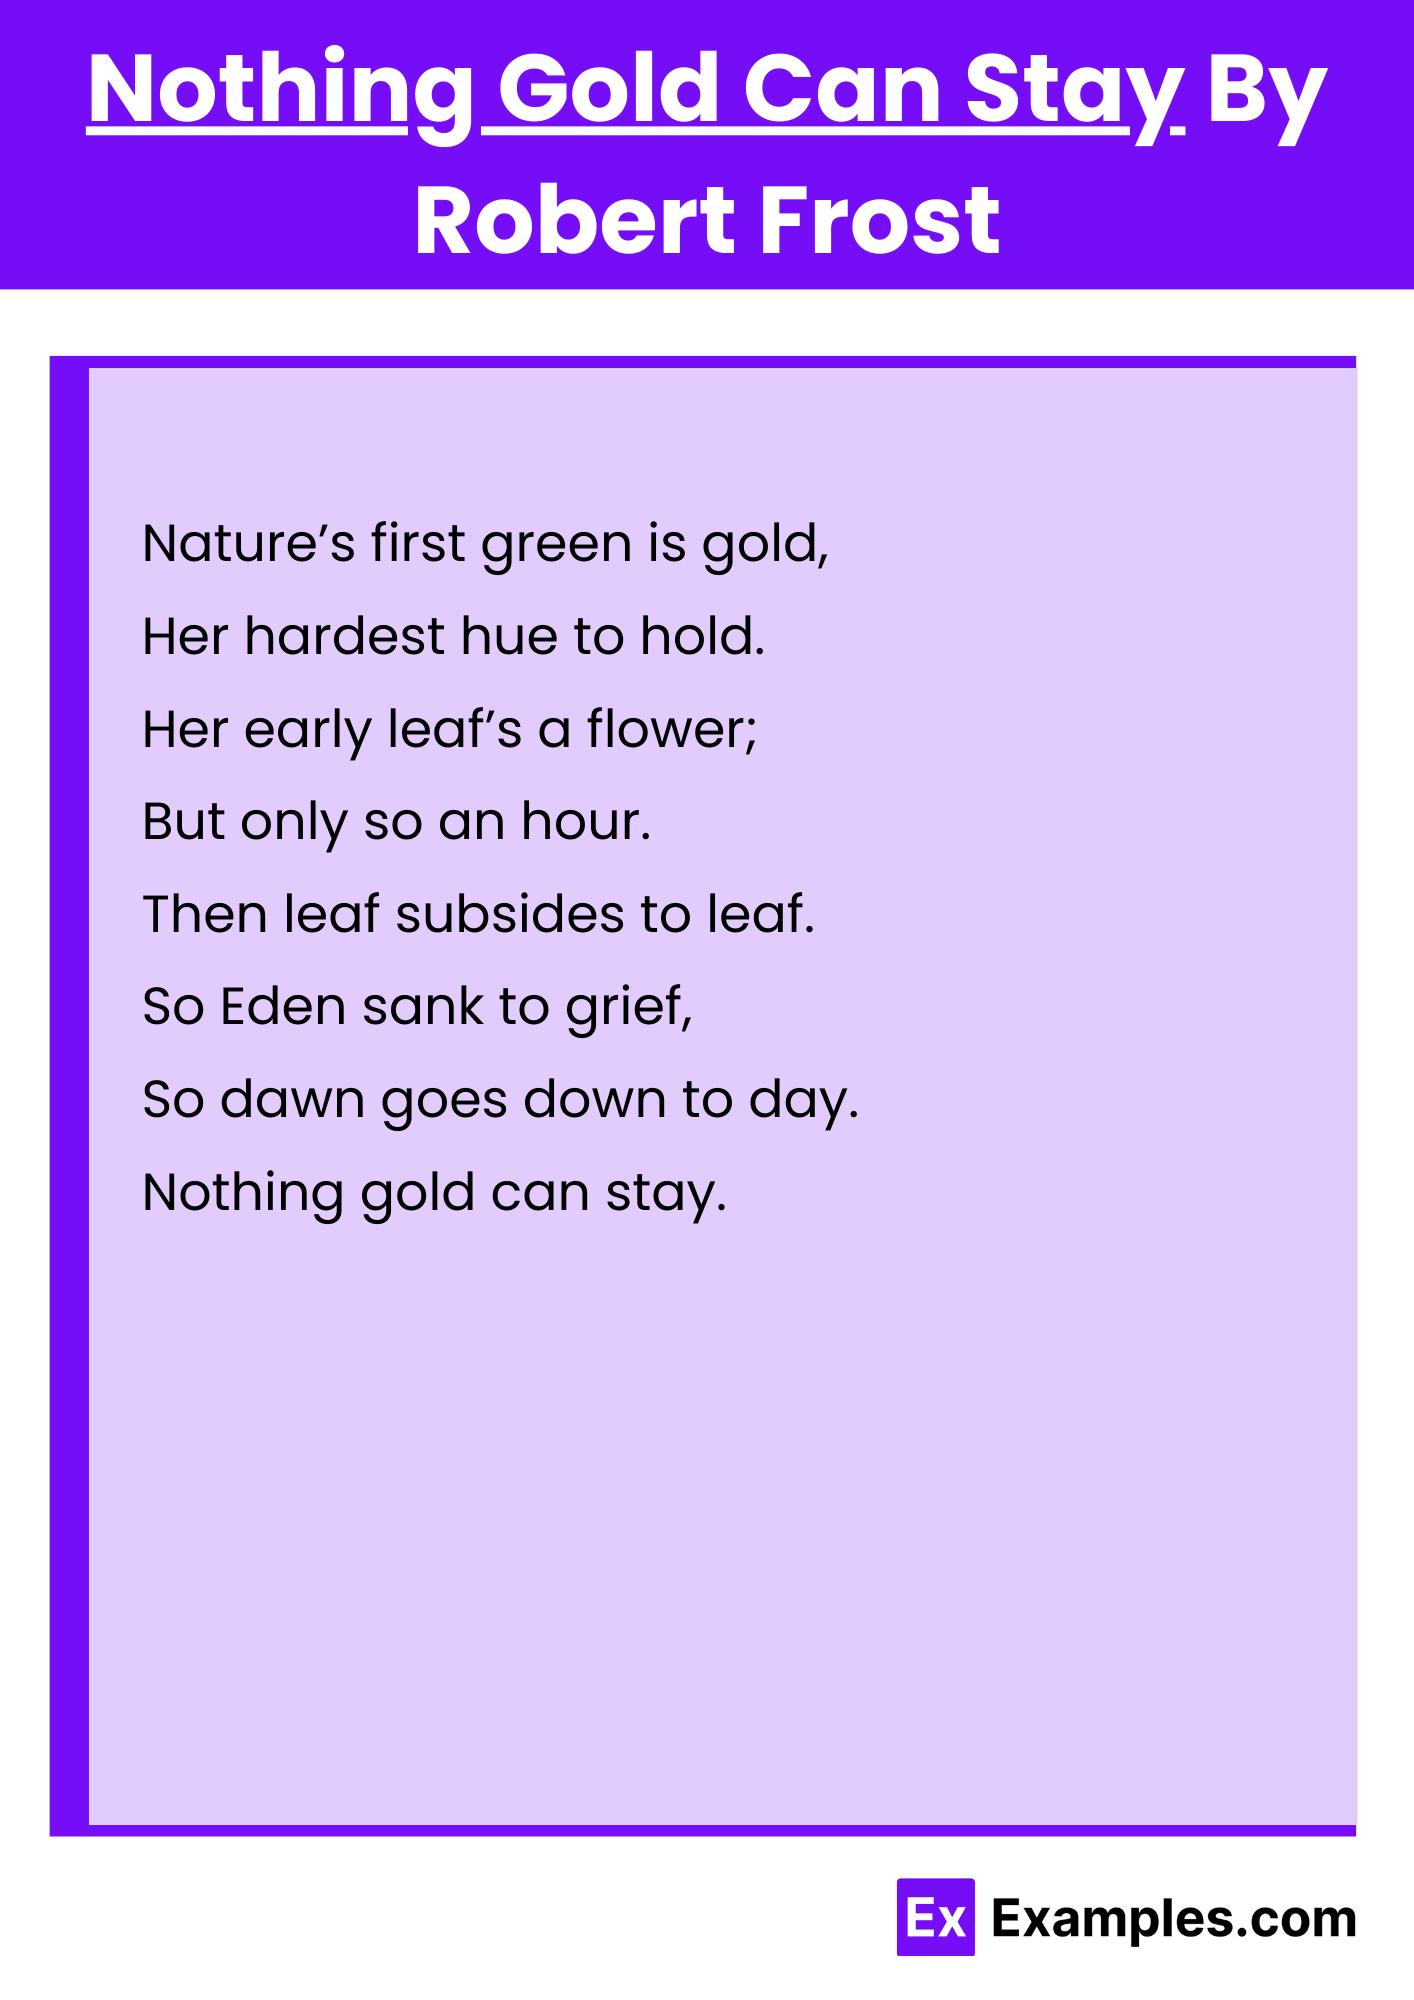 Nothing Gold Can Stay By Robert Frost